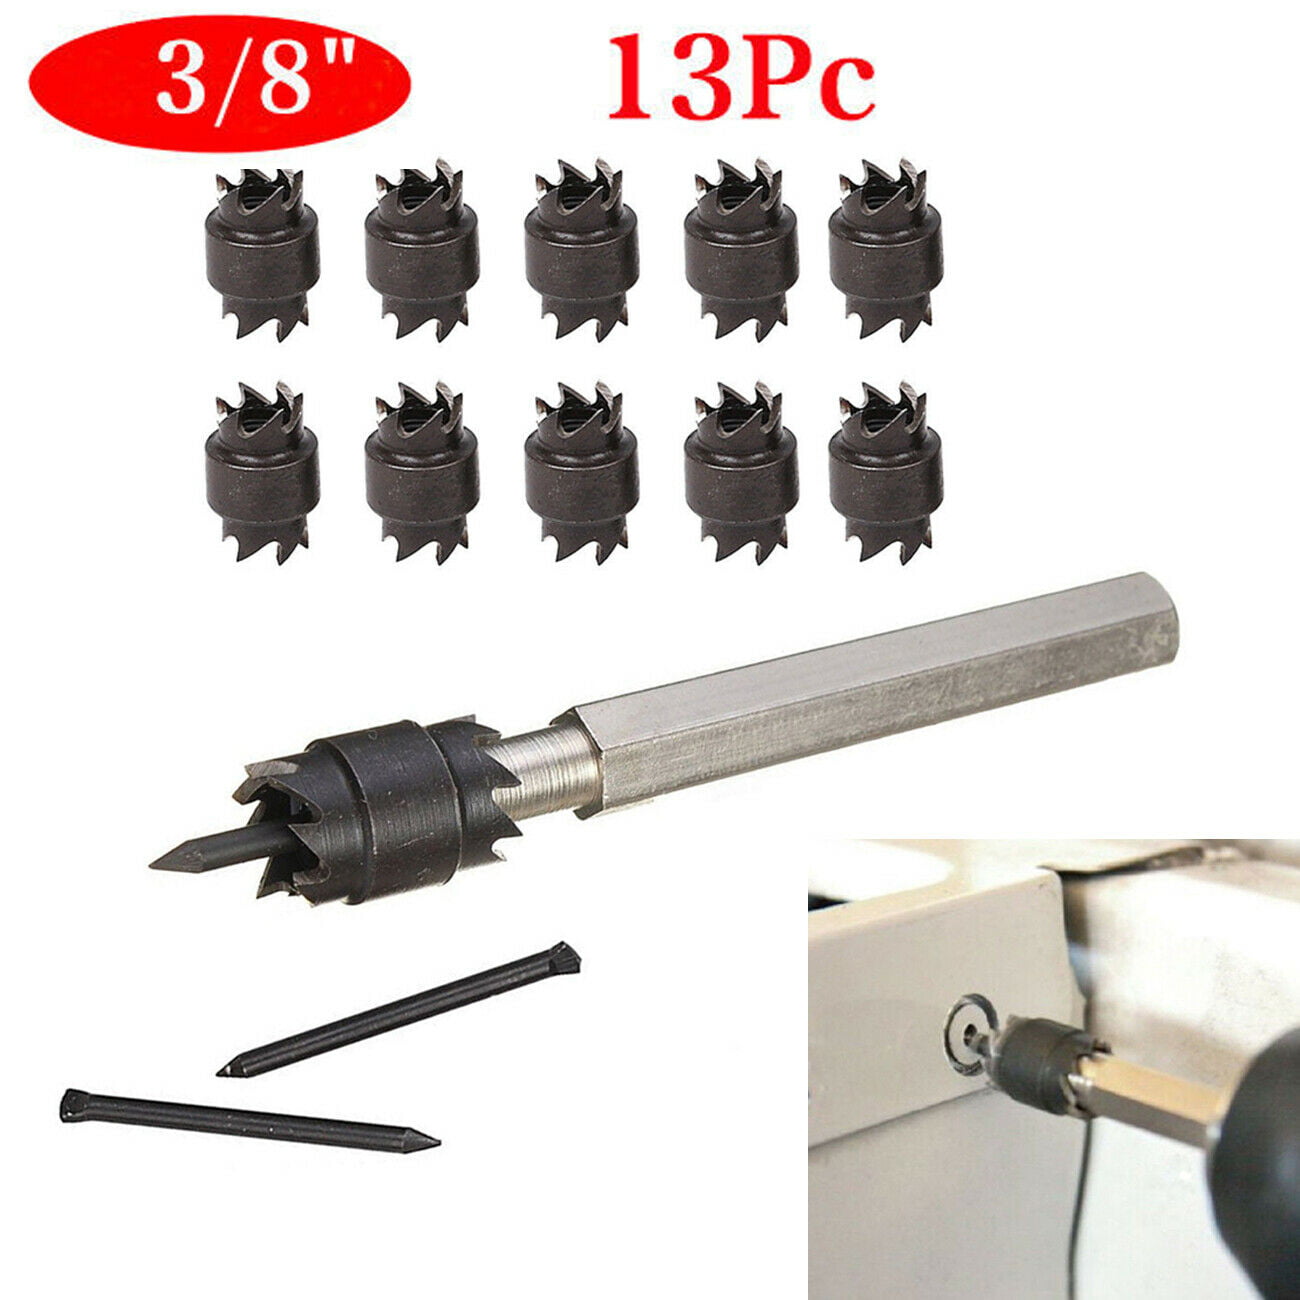 BRAND NEW 3/8" DOUBLE SIDED ROTARY SPOT WELD CUTTER DRILL BIT 